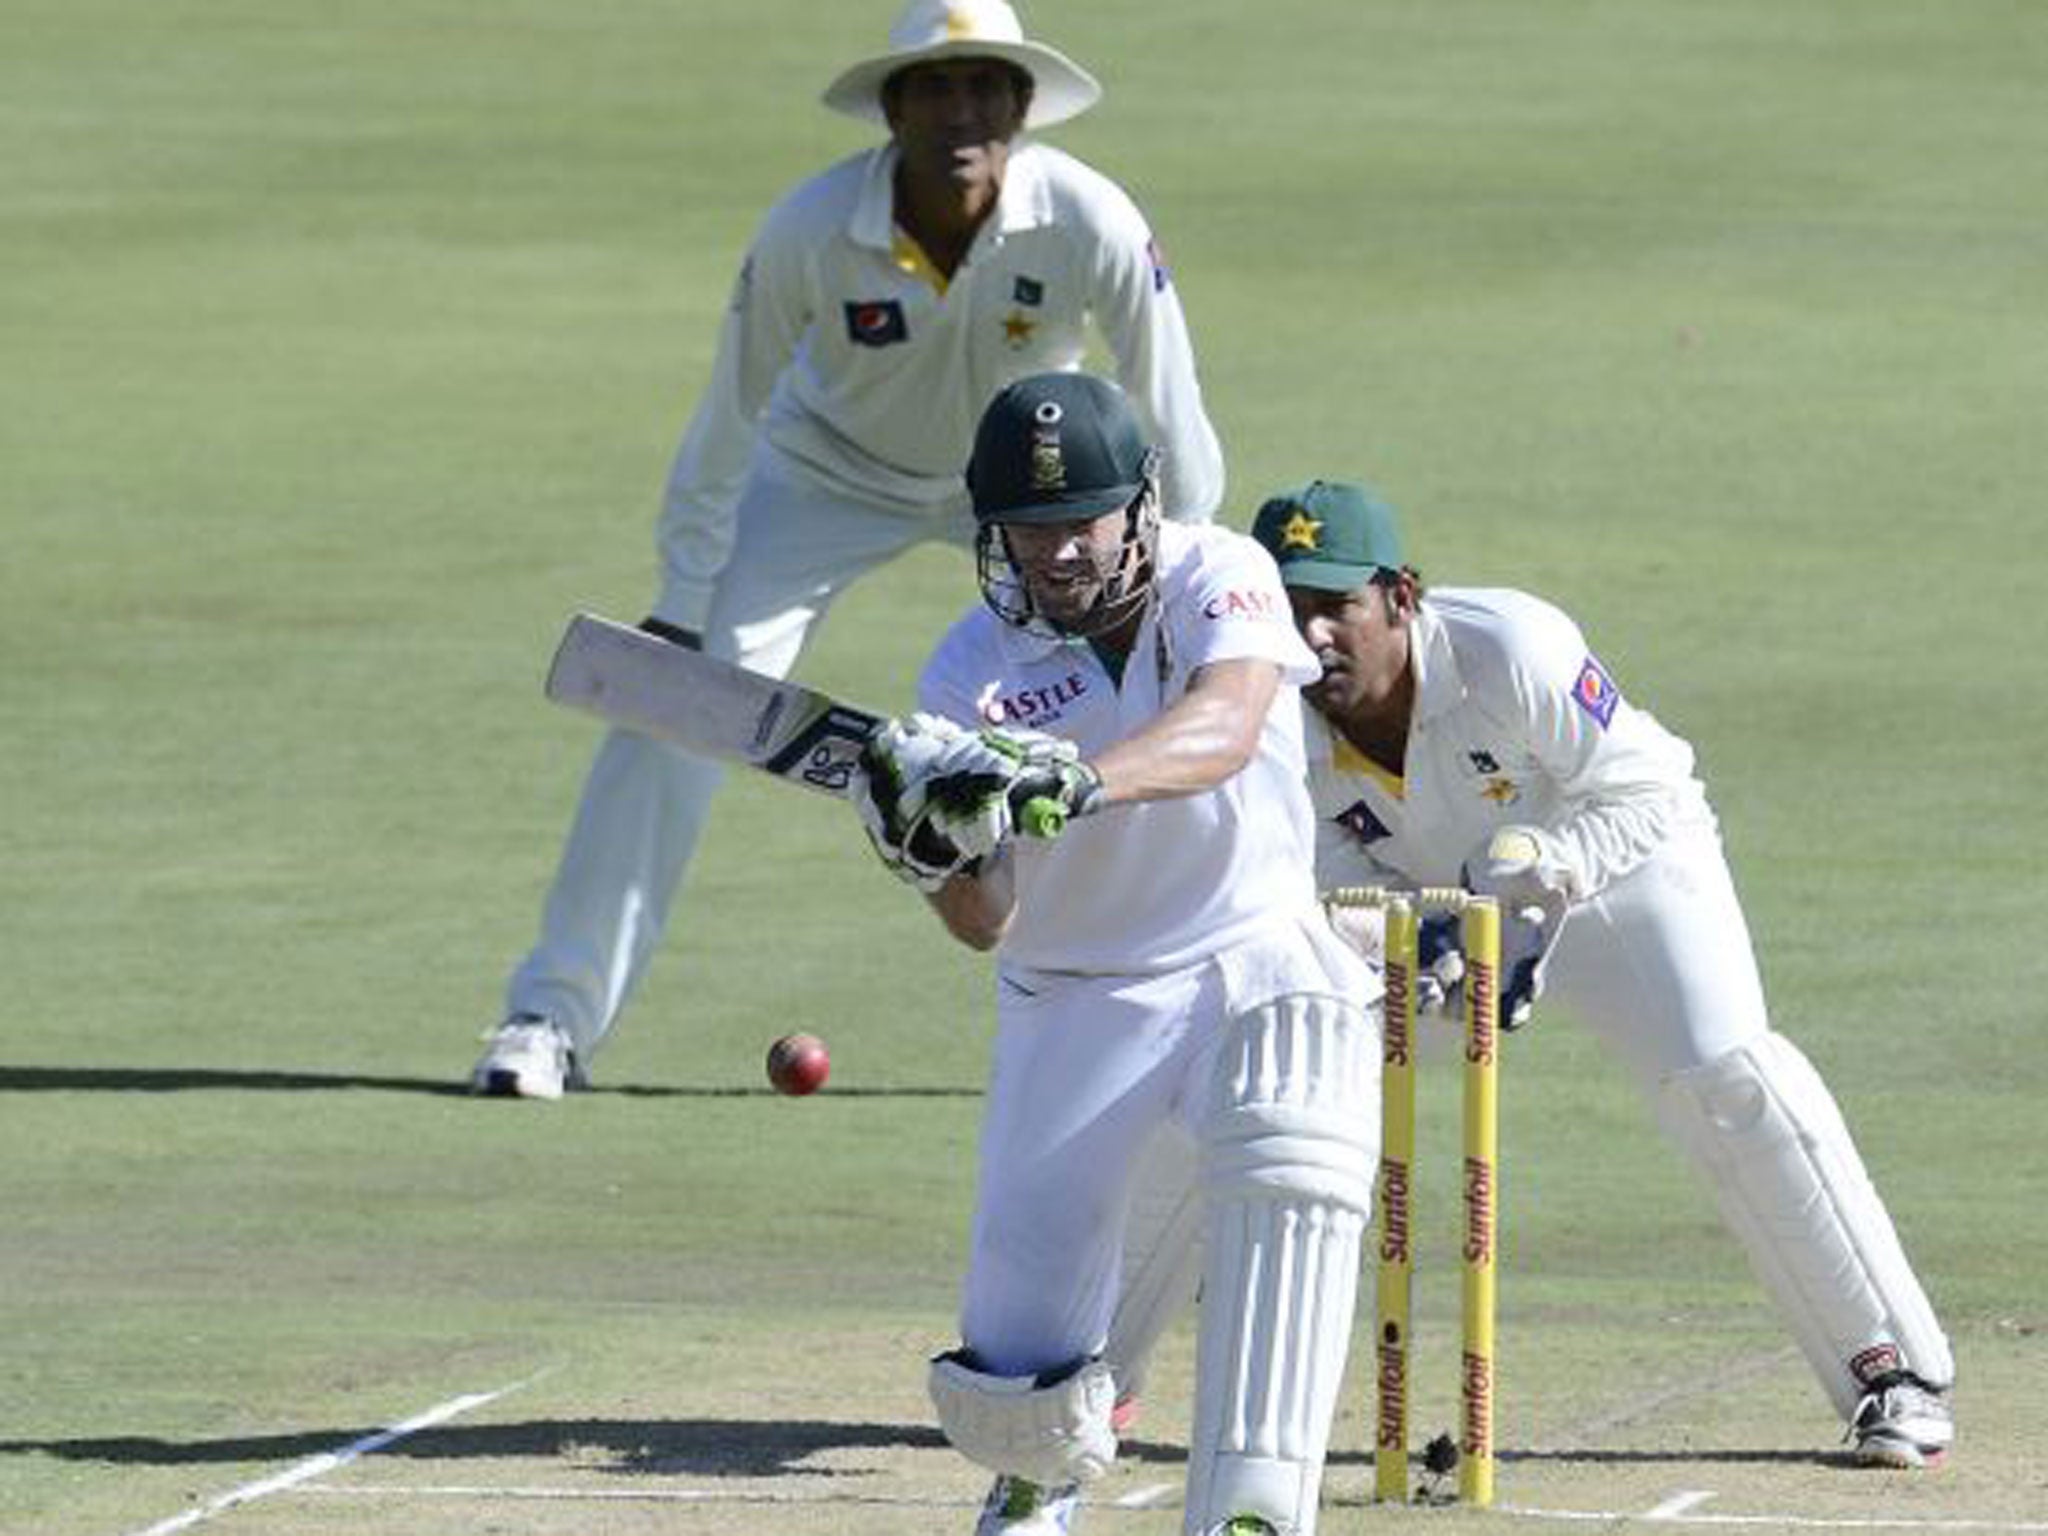 AB de Villiers on his way to an unbeaten 98 for South Africa